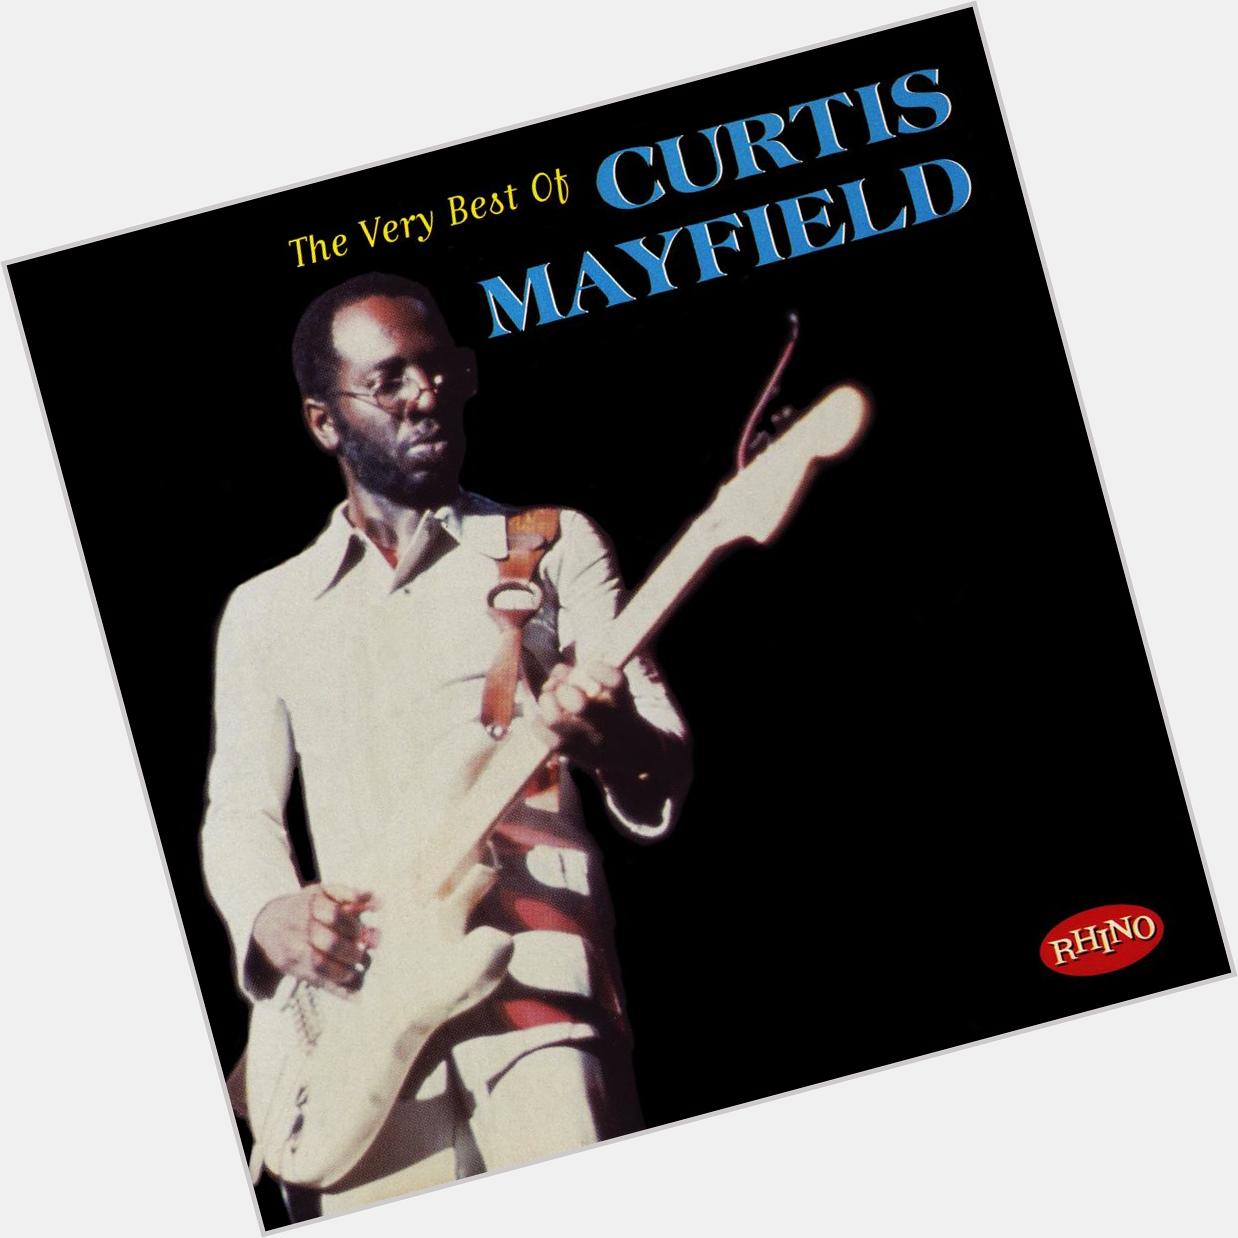 Happy Birthday to Curtis Mayfield, who would have turned 73 today! 